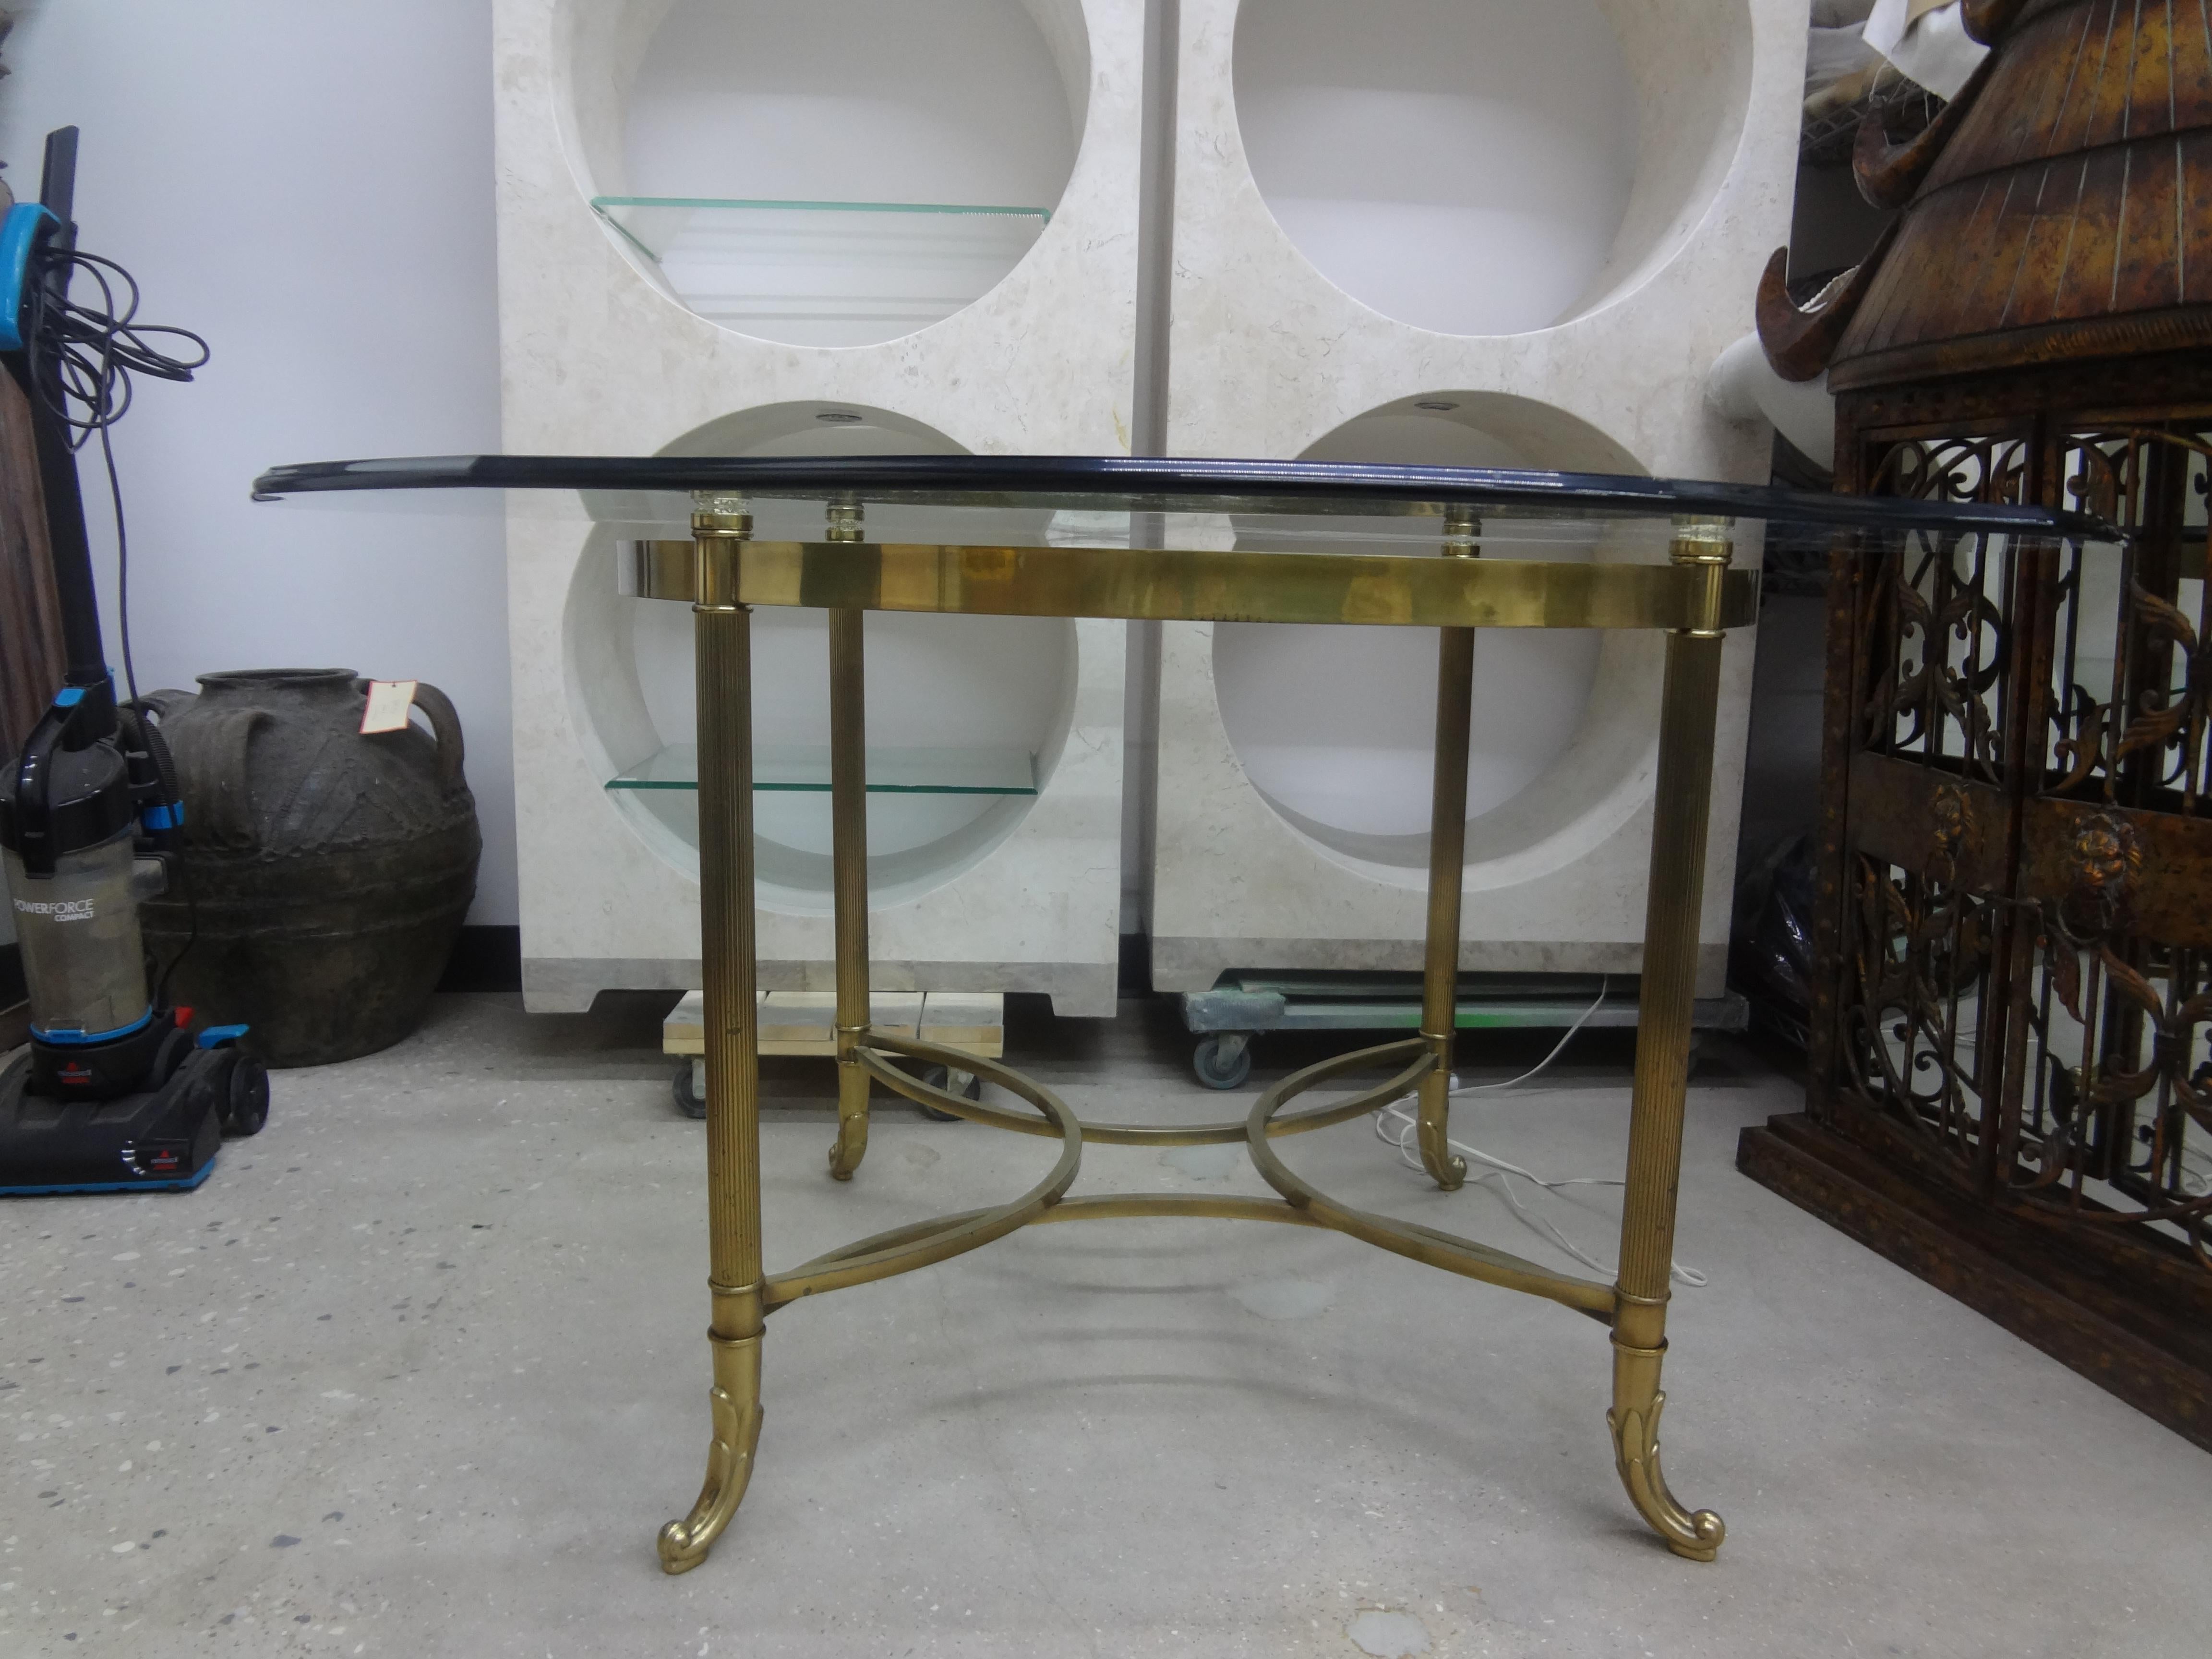 Italian Hollywood Regency Brass Center Table Or Dining Table.
This versatile vintage 54 inch Italian brass table can be used as a center table, dining table, game table or breakfast table. It retains the beautiful original scalloped glass